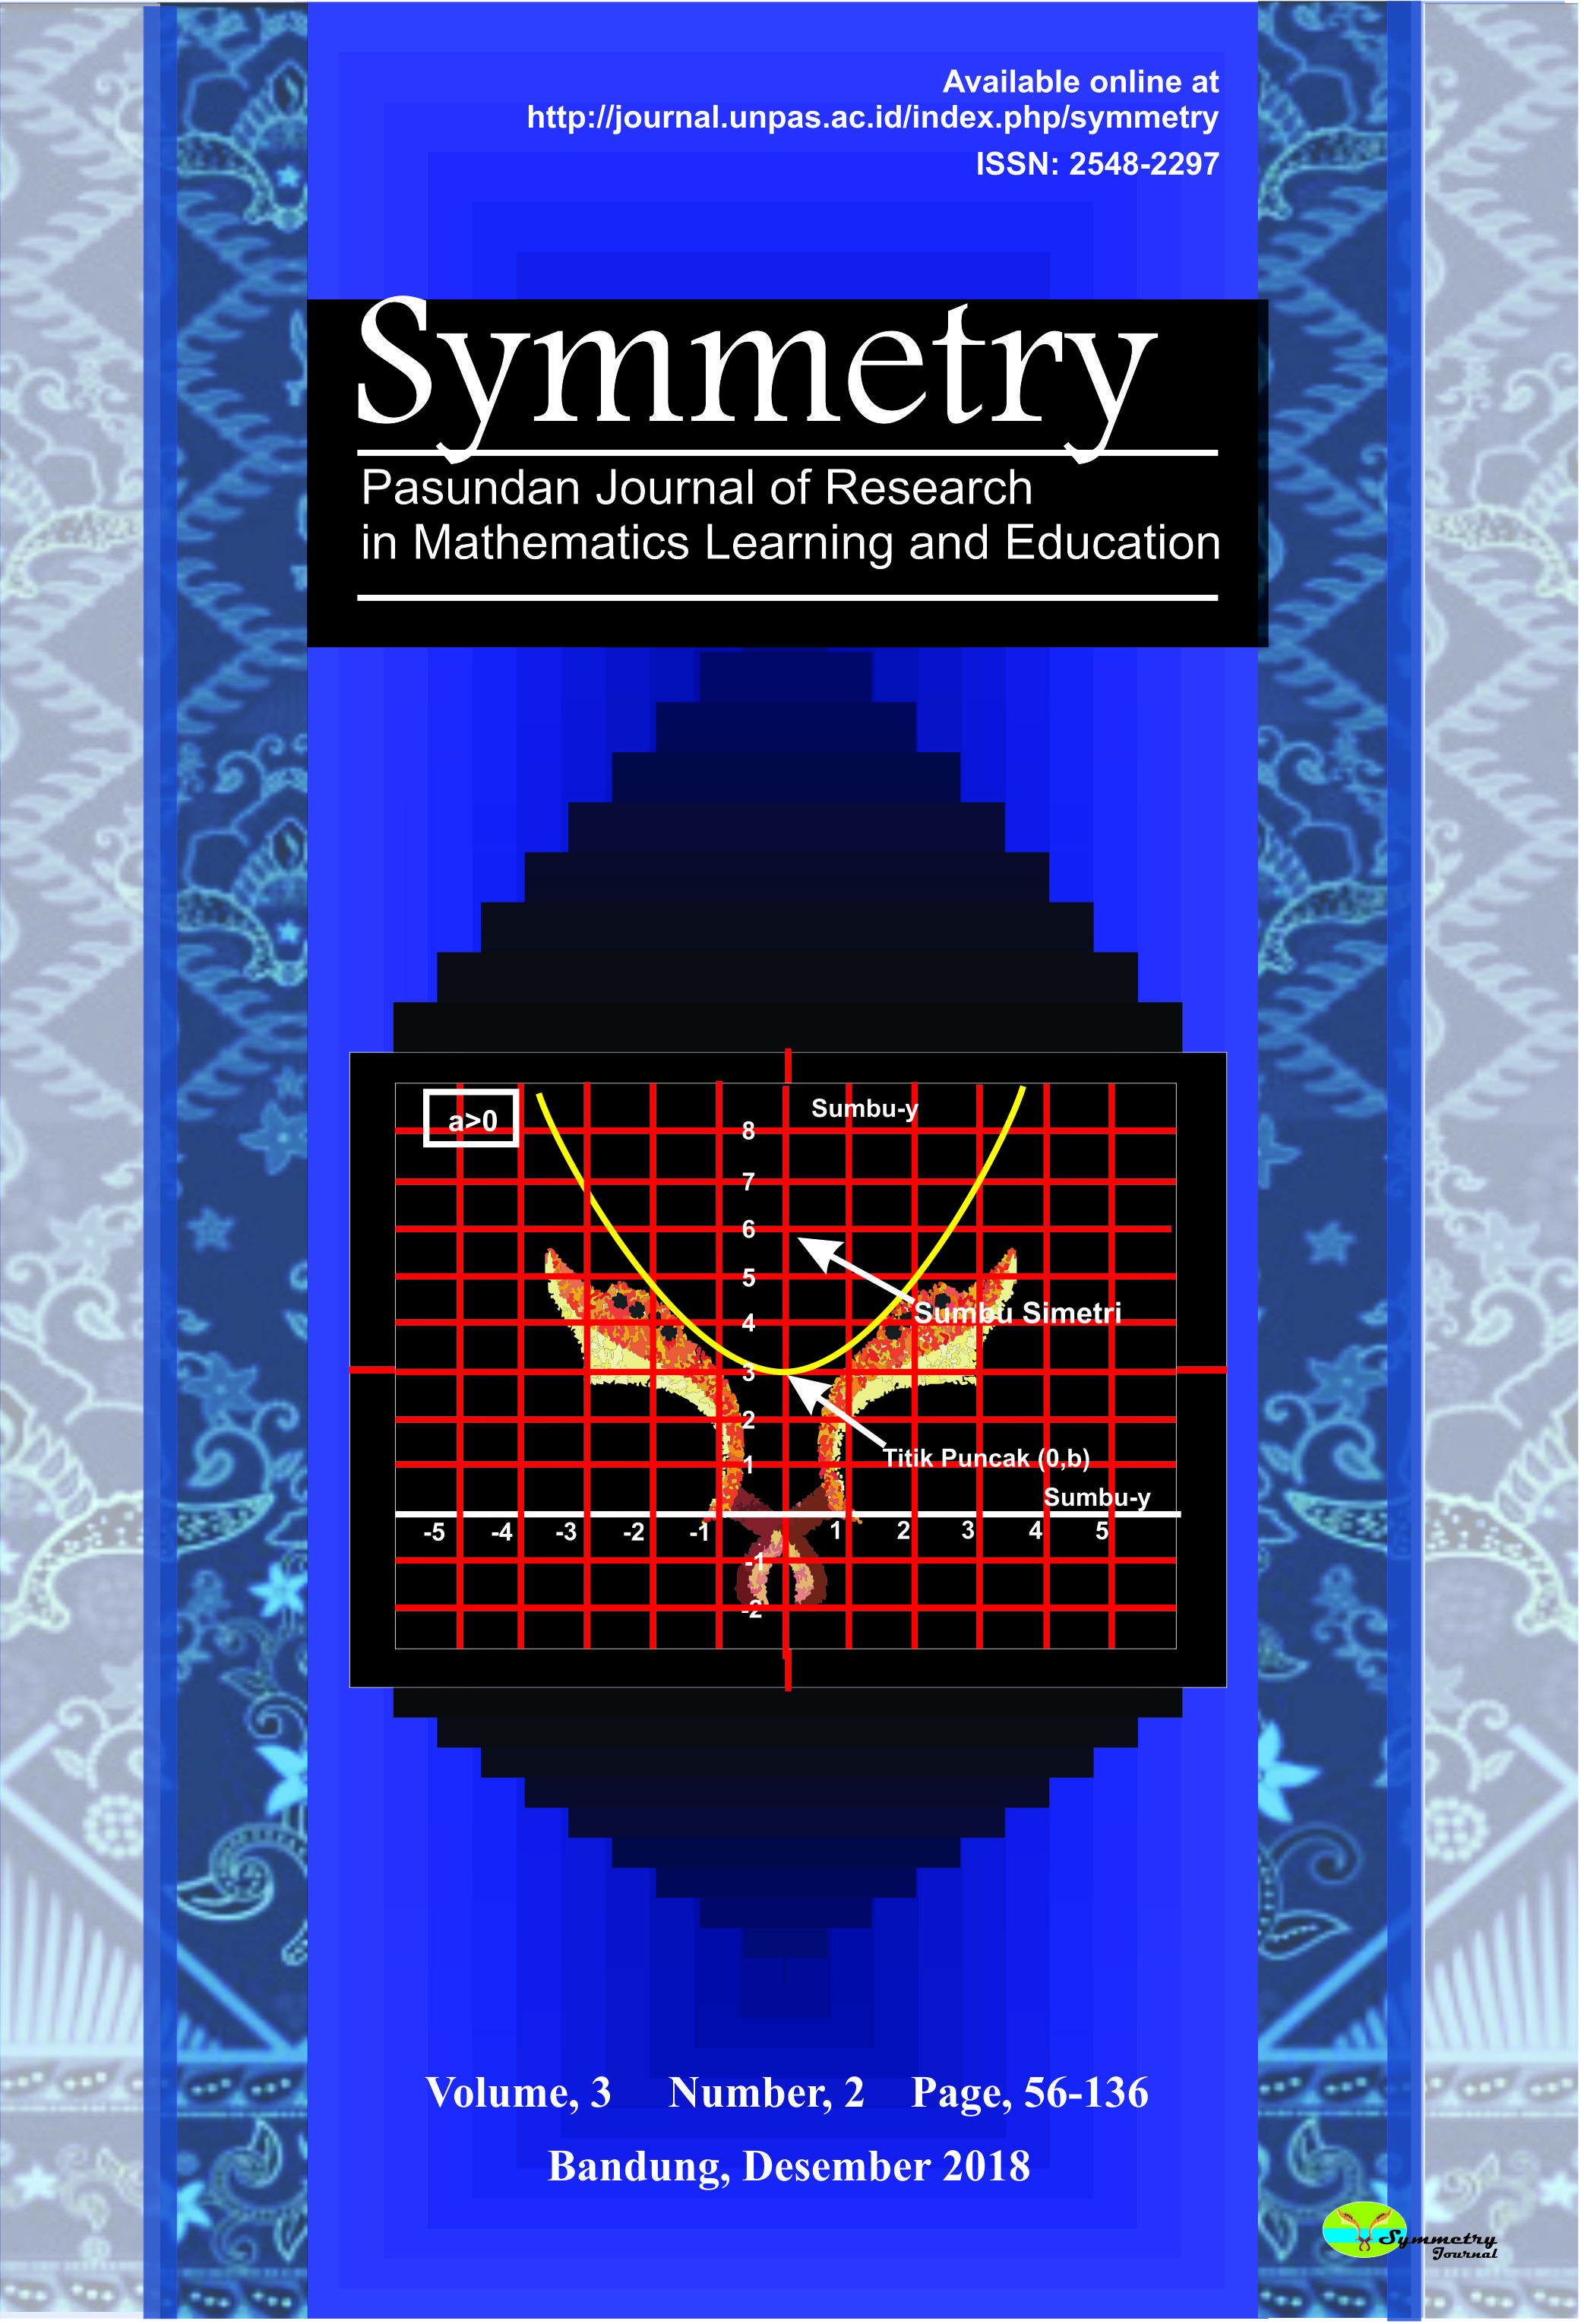 					Lihat Vol 4 No 2 (2019): Symmetry: Pasundan Journal of Research in Mathematics Learning and Education
				